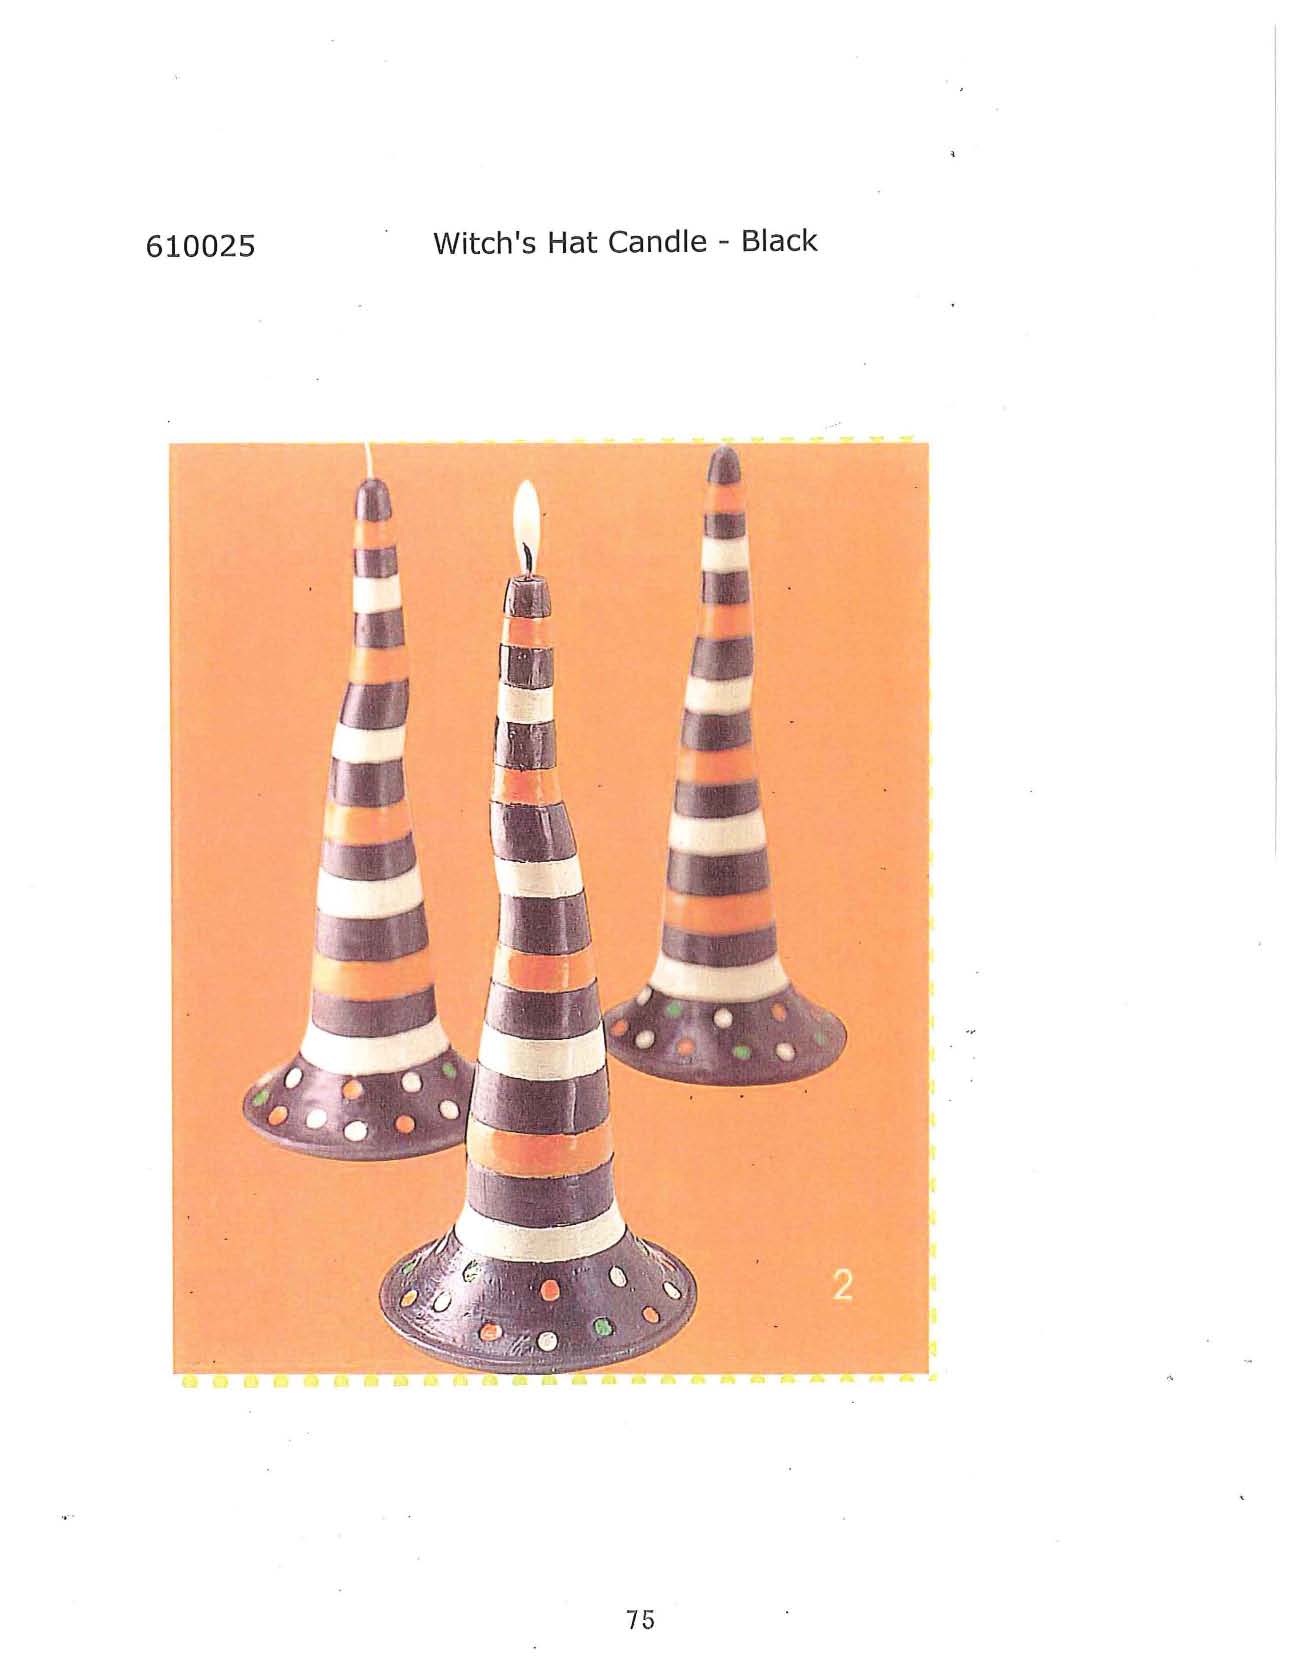 Witch's Hat Candle - Black